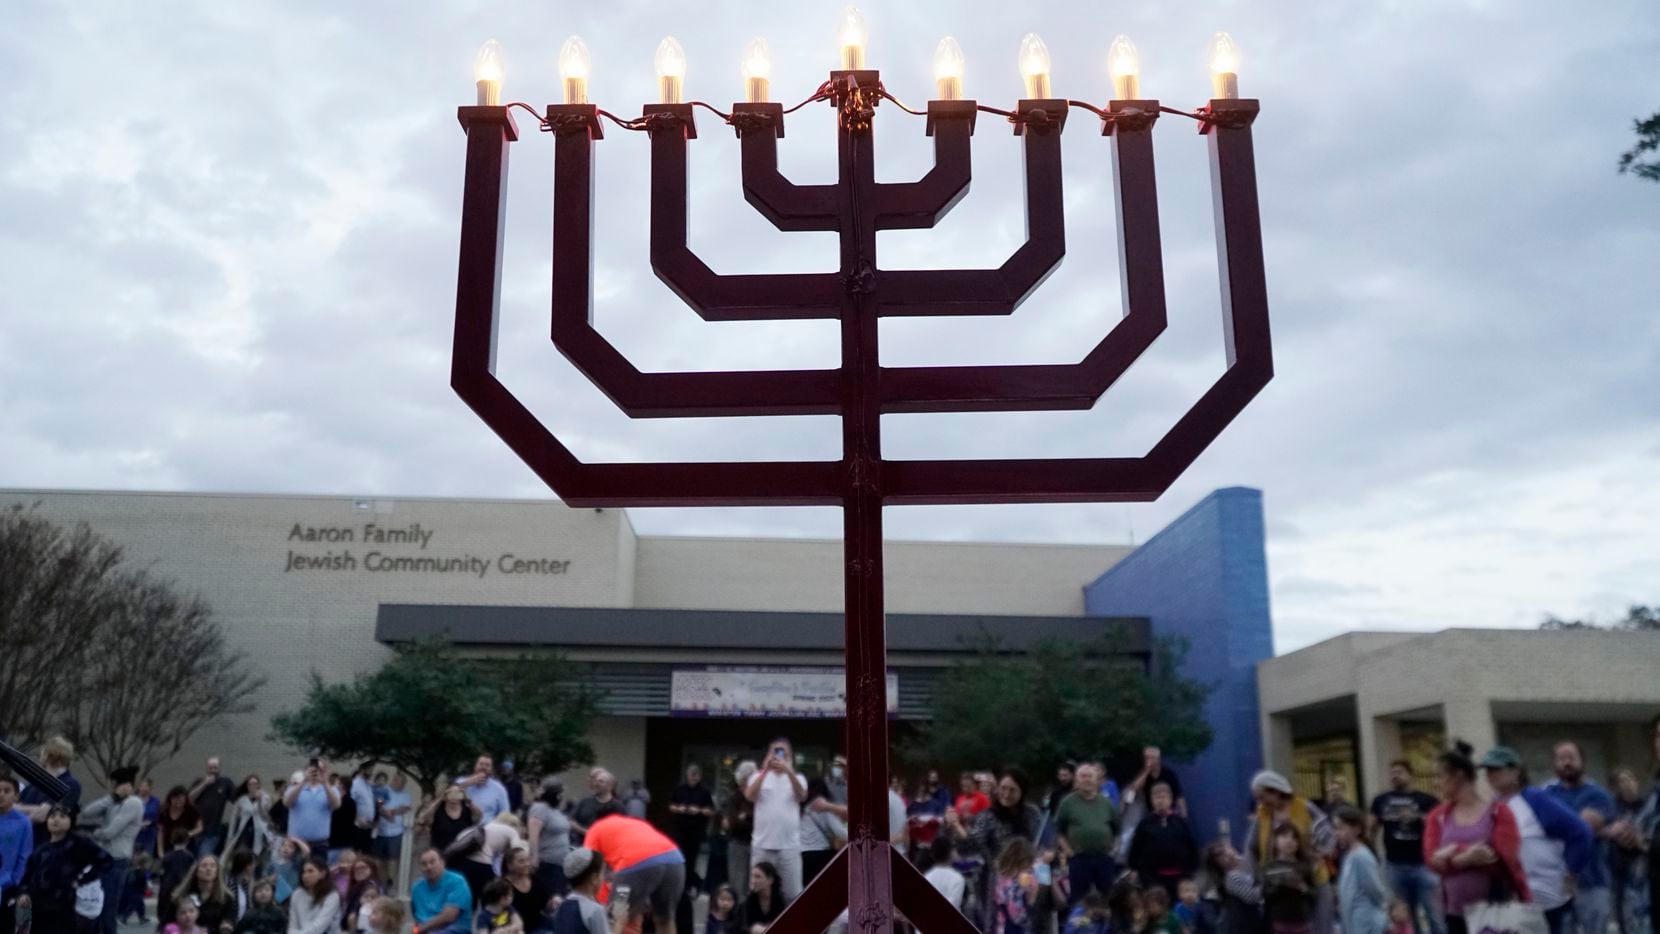 Austin Rabbi Steven Folberg writes about arson that nearly destroyed his synagogue. In this...